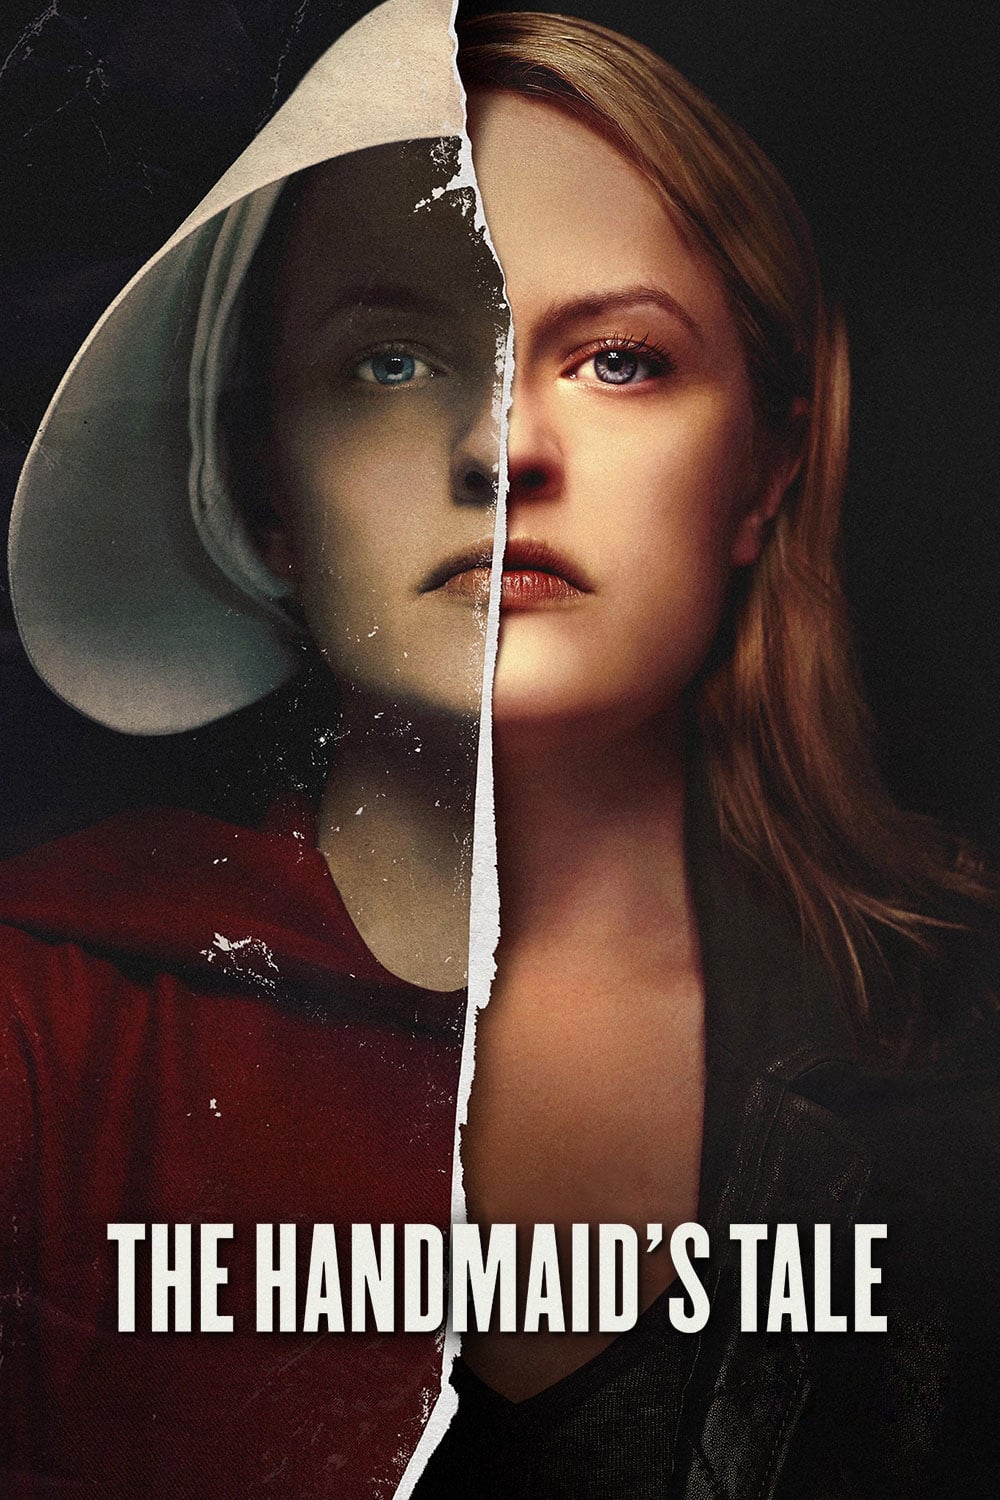 The Handmaid's Tale rating